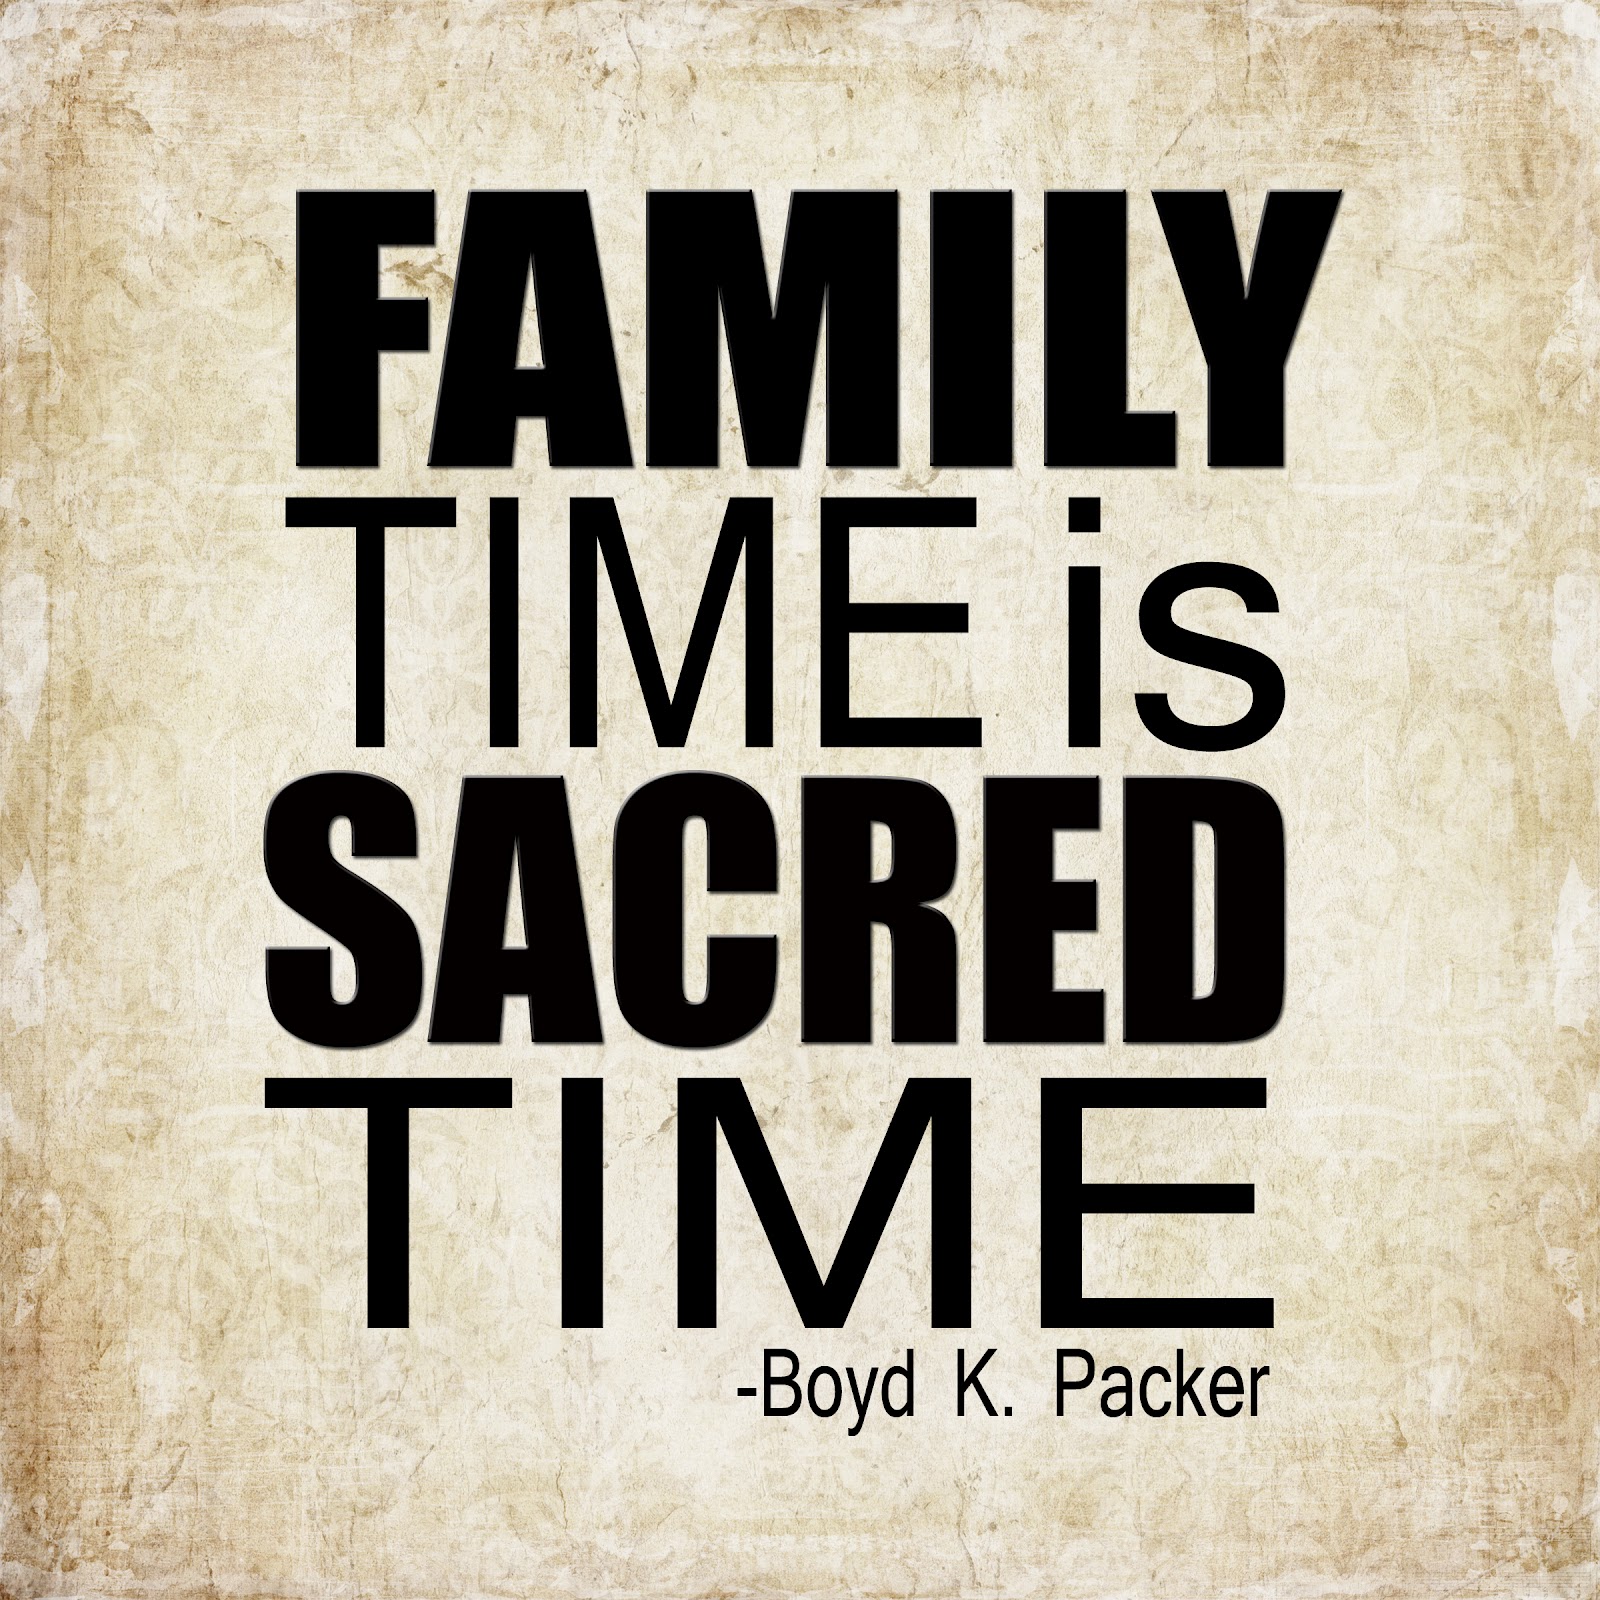  Family  Spending Time  Together Quotes  QuotesGram